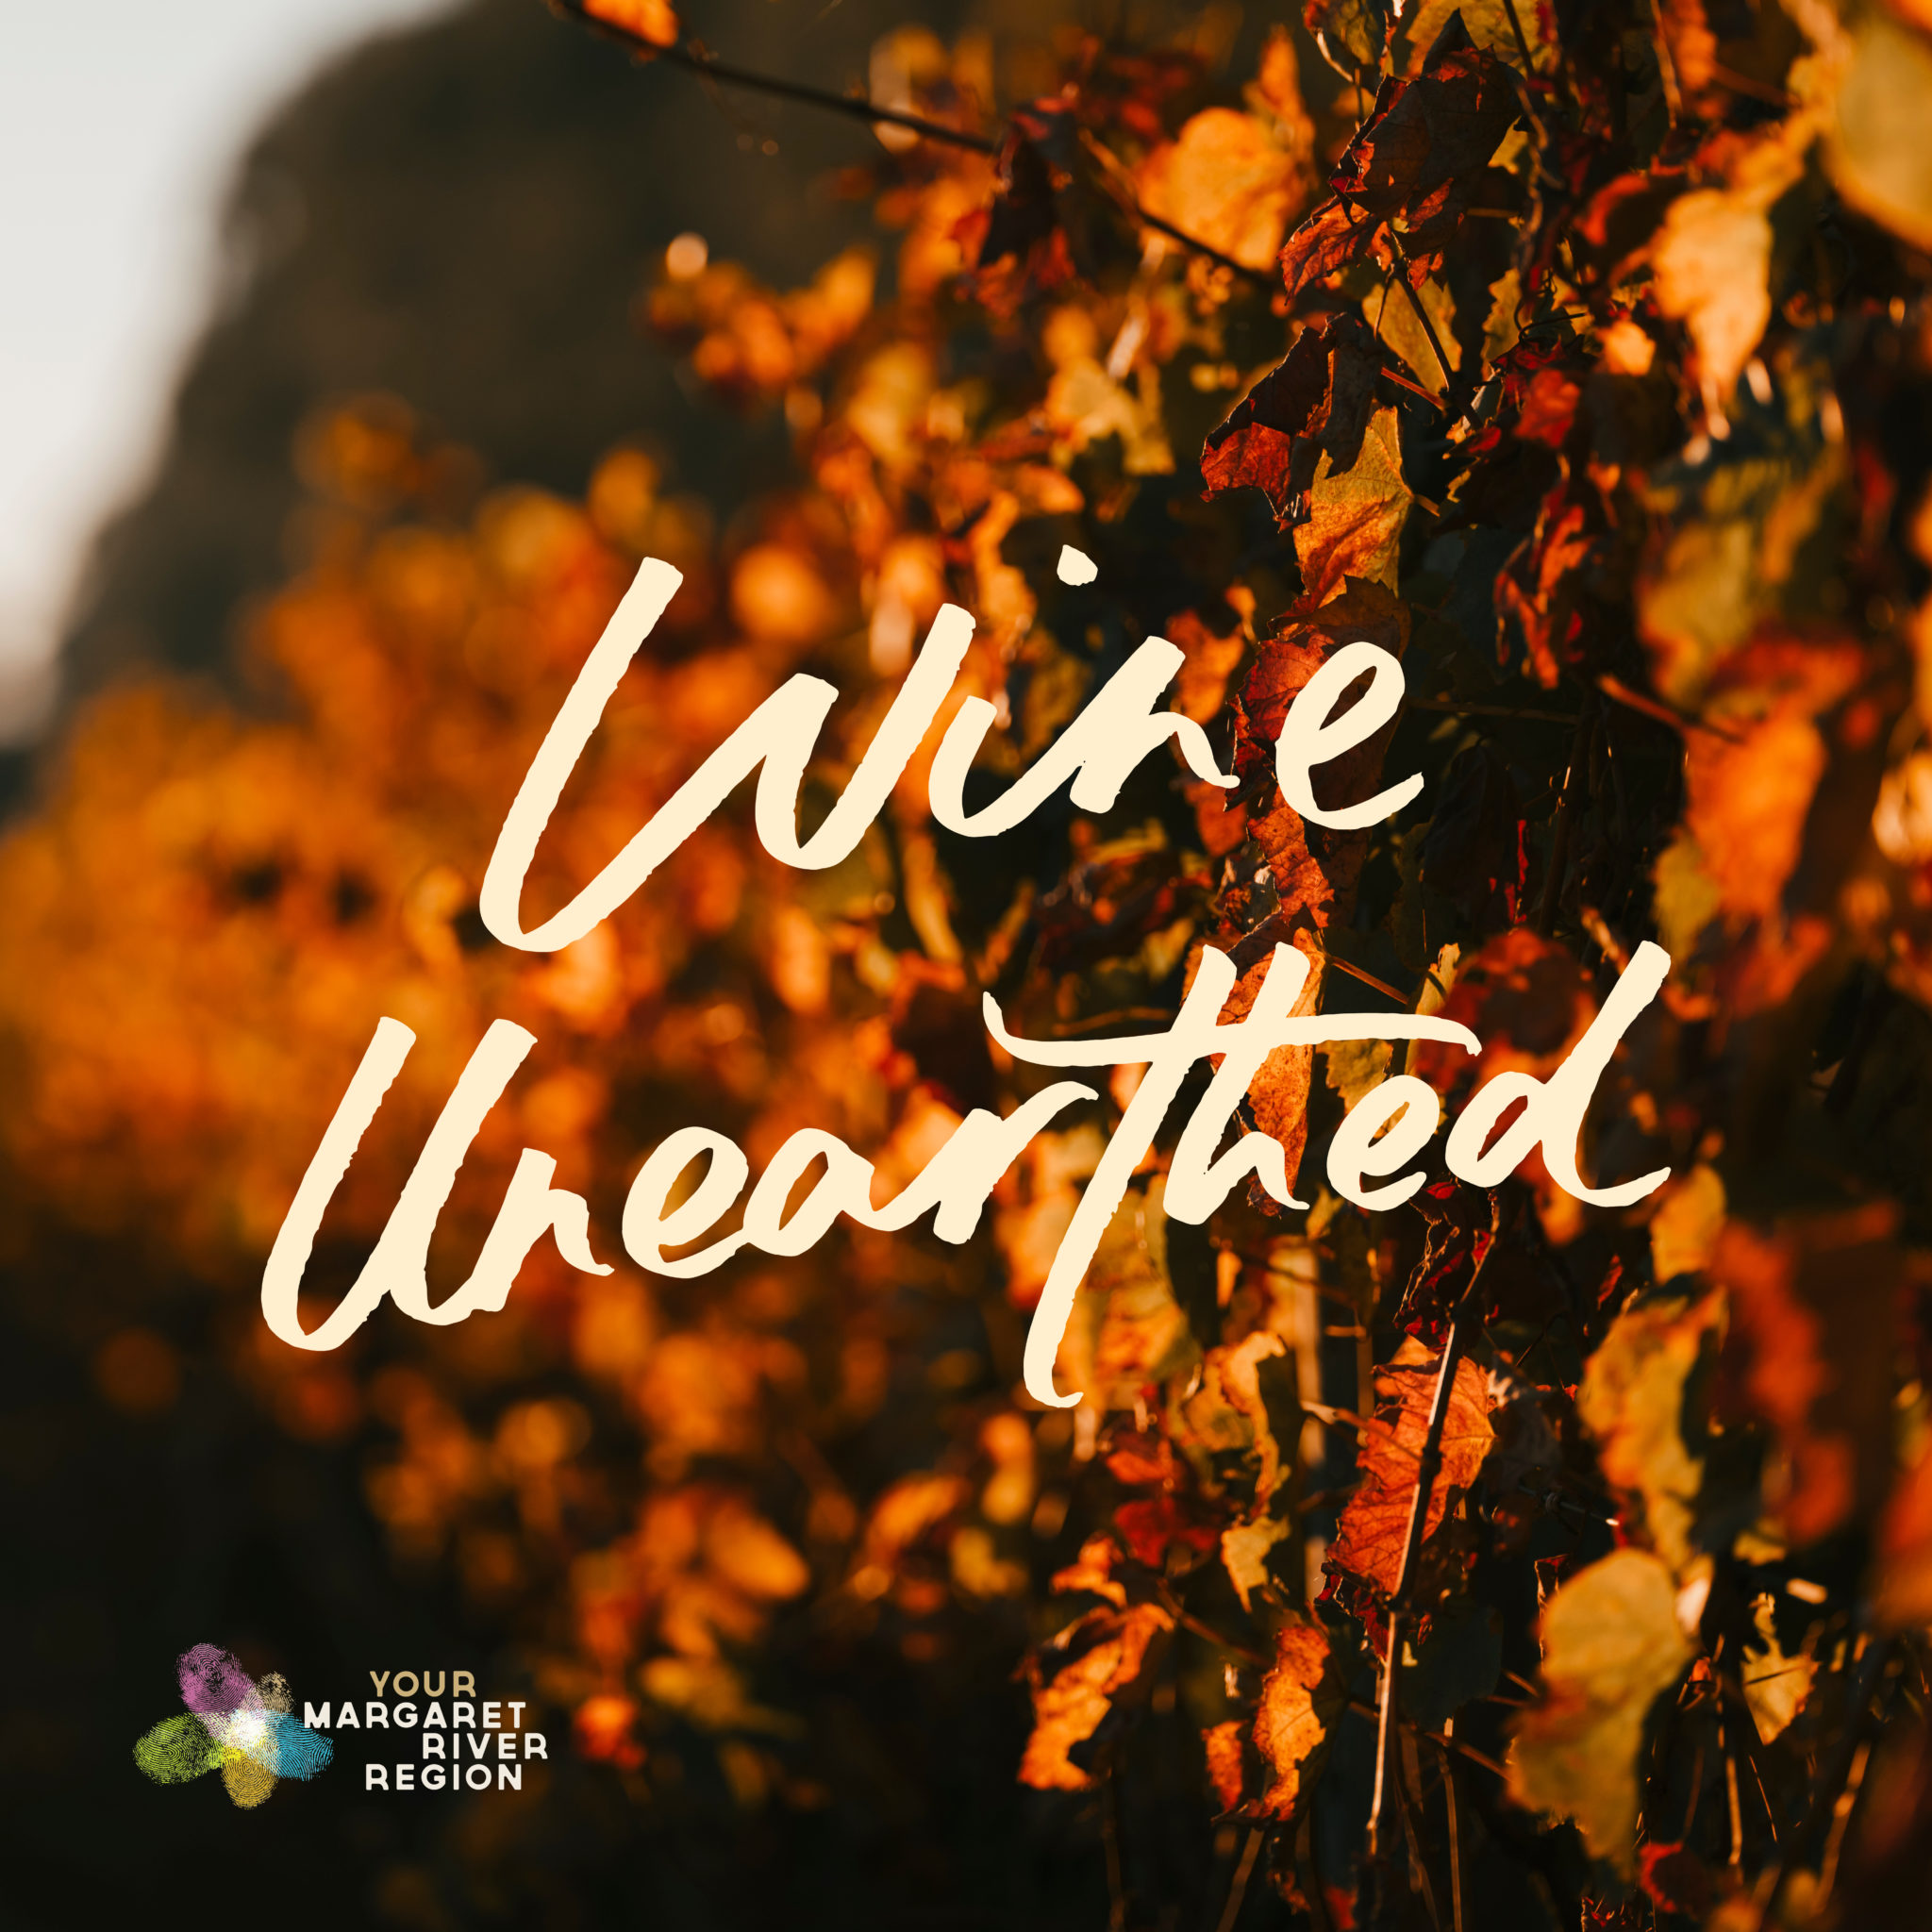 Wine Unearthed Promotional Material